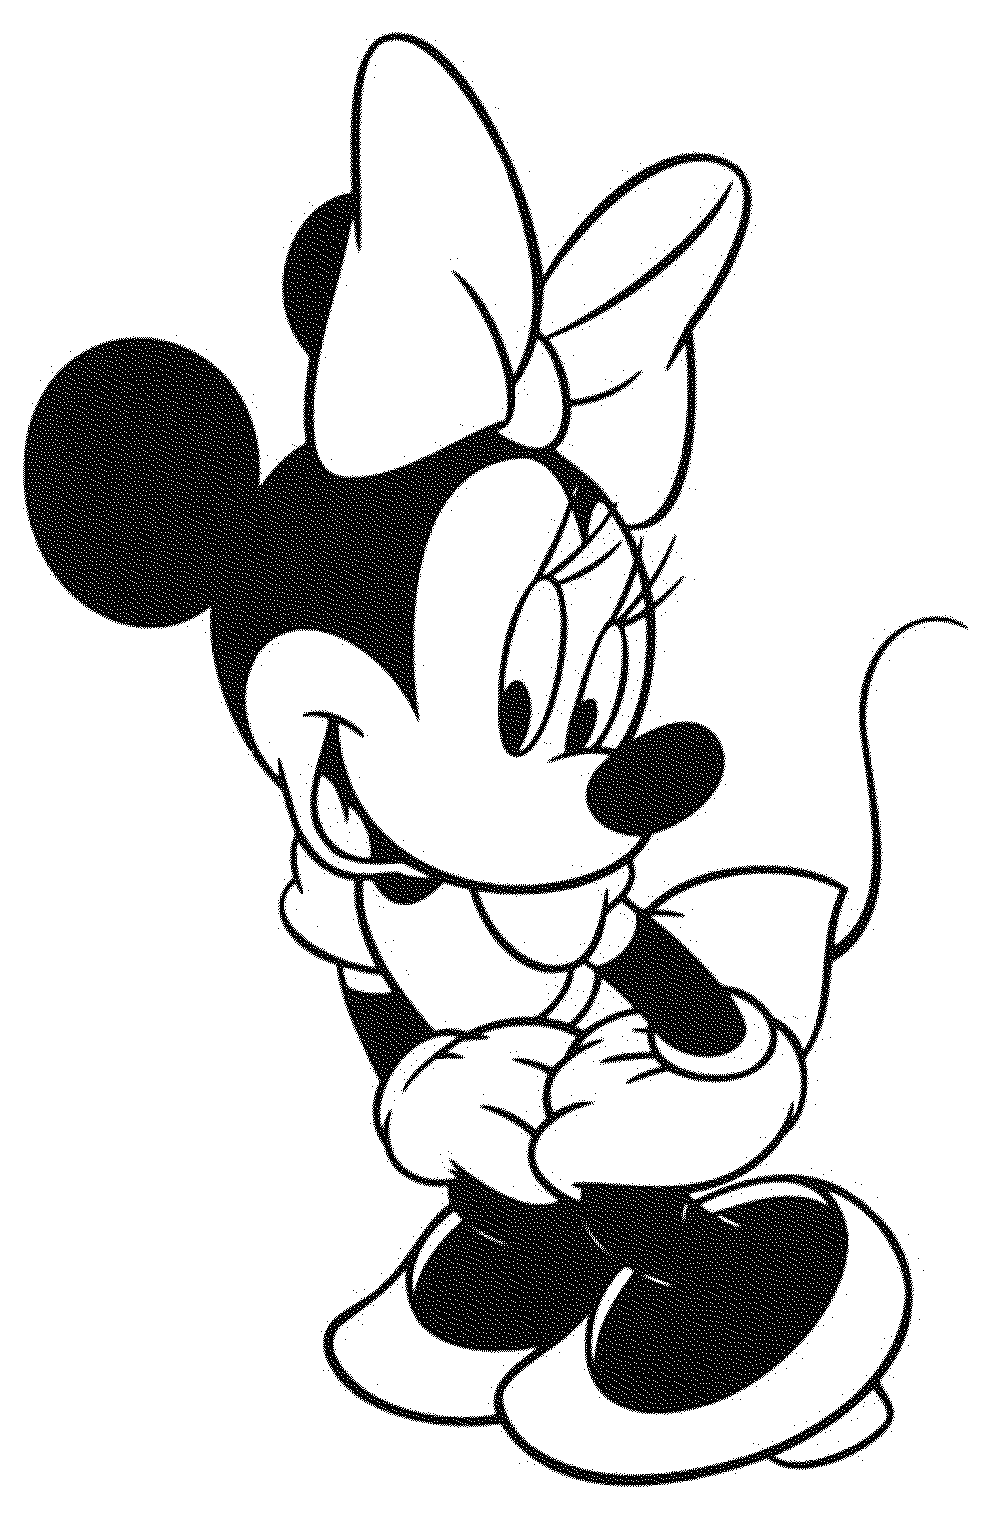 coloring pages of minnie mouse